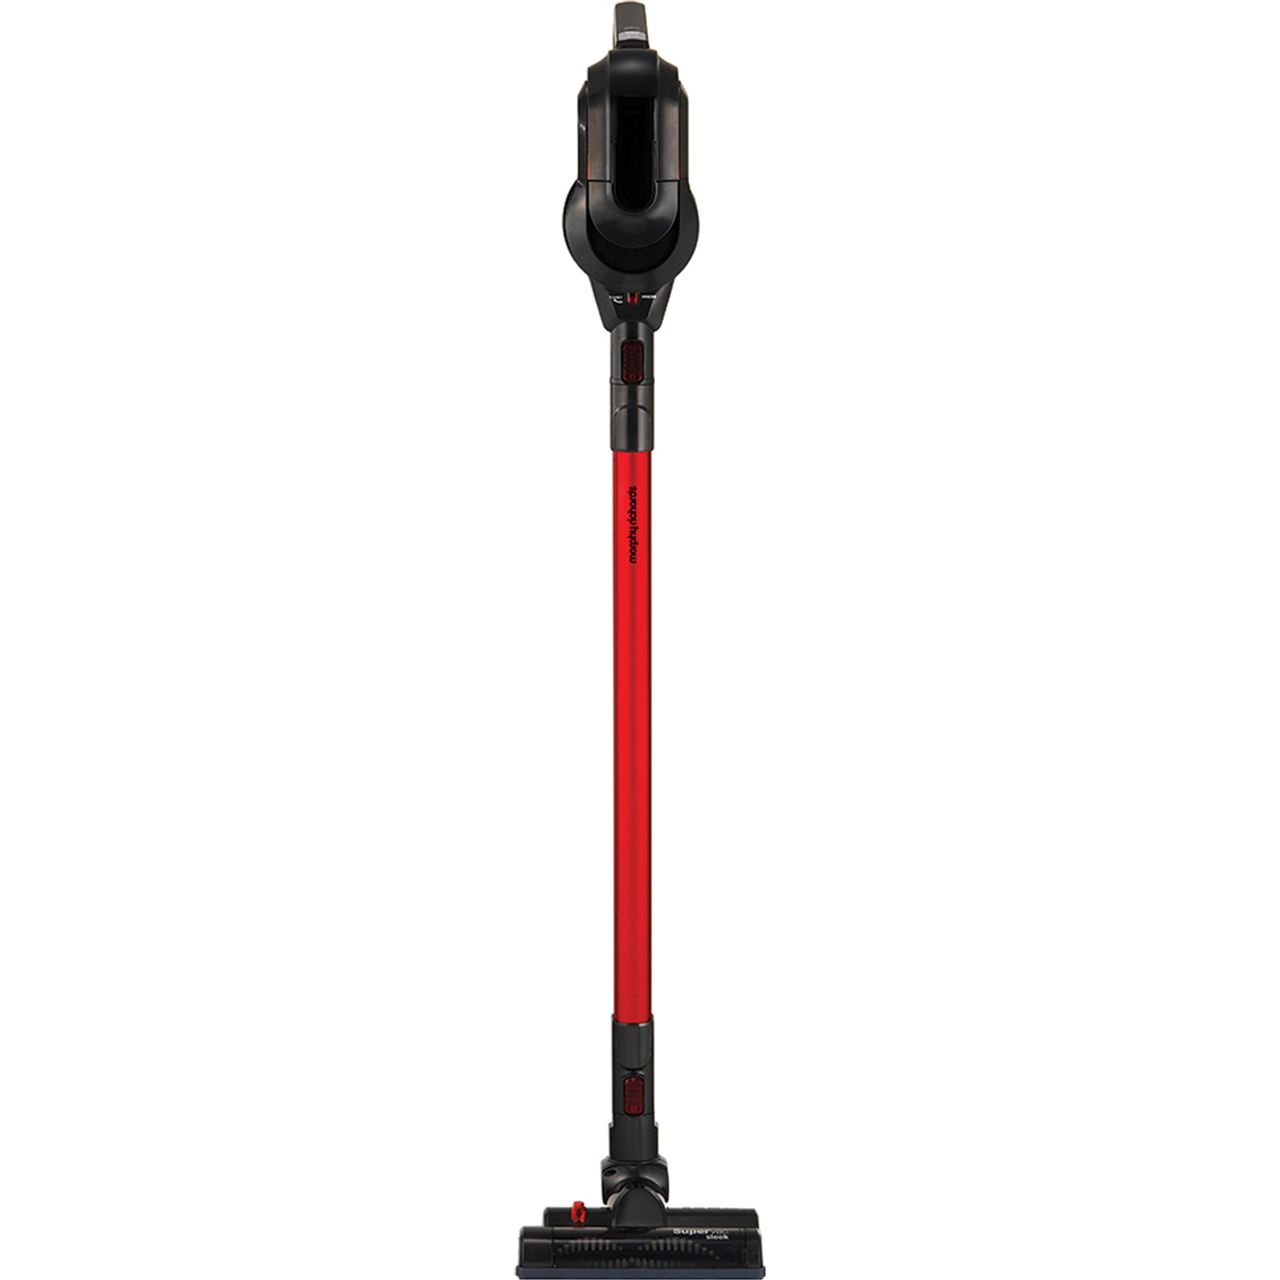 Morphy Richards Supervac 731007 Cordless Vacuum Cleaner with up to 40 Minutes Run Time Review